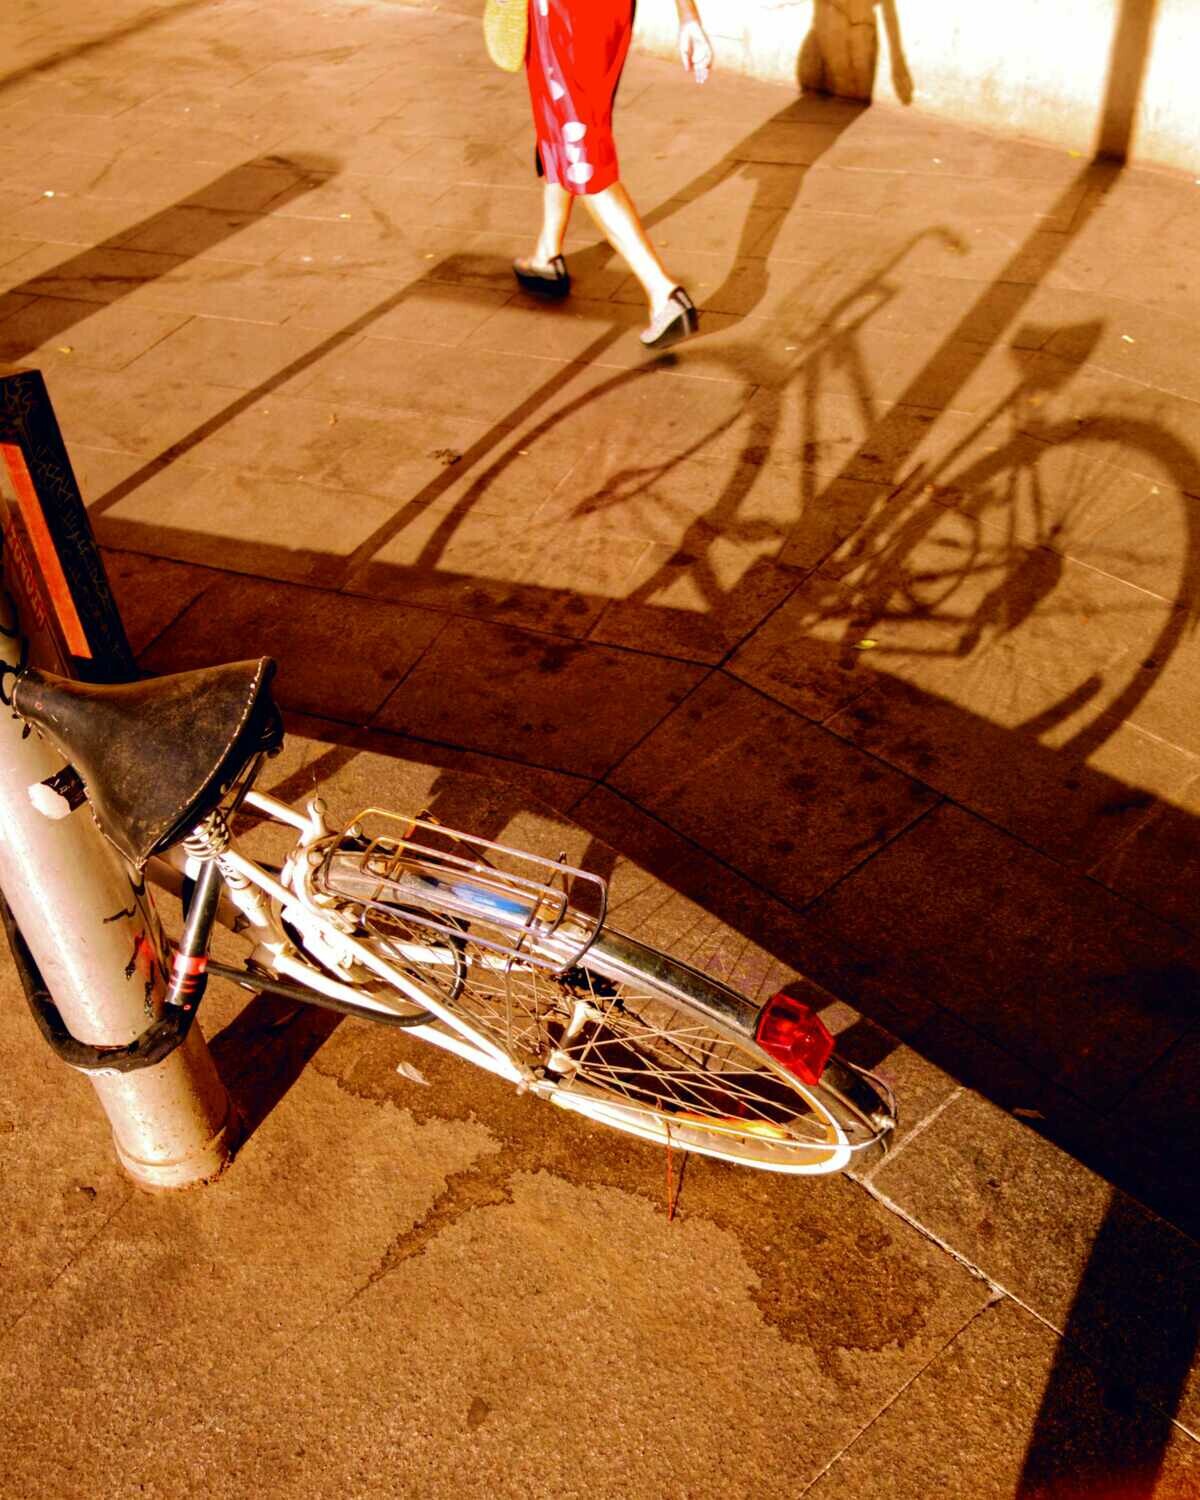 Bike shadow and woman passing by.Universo Fran.